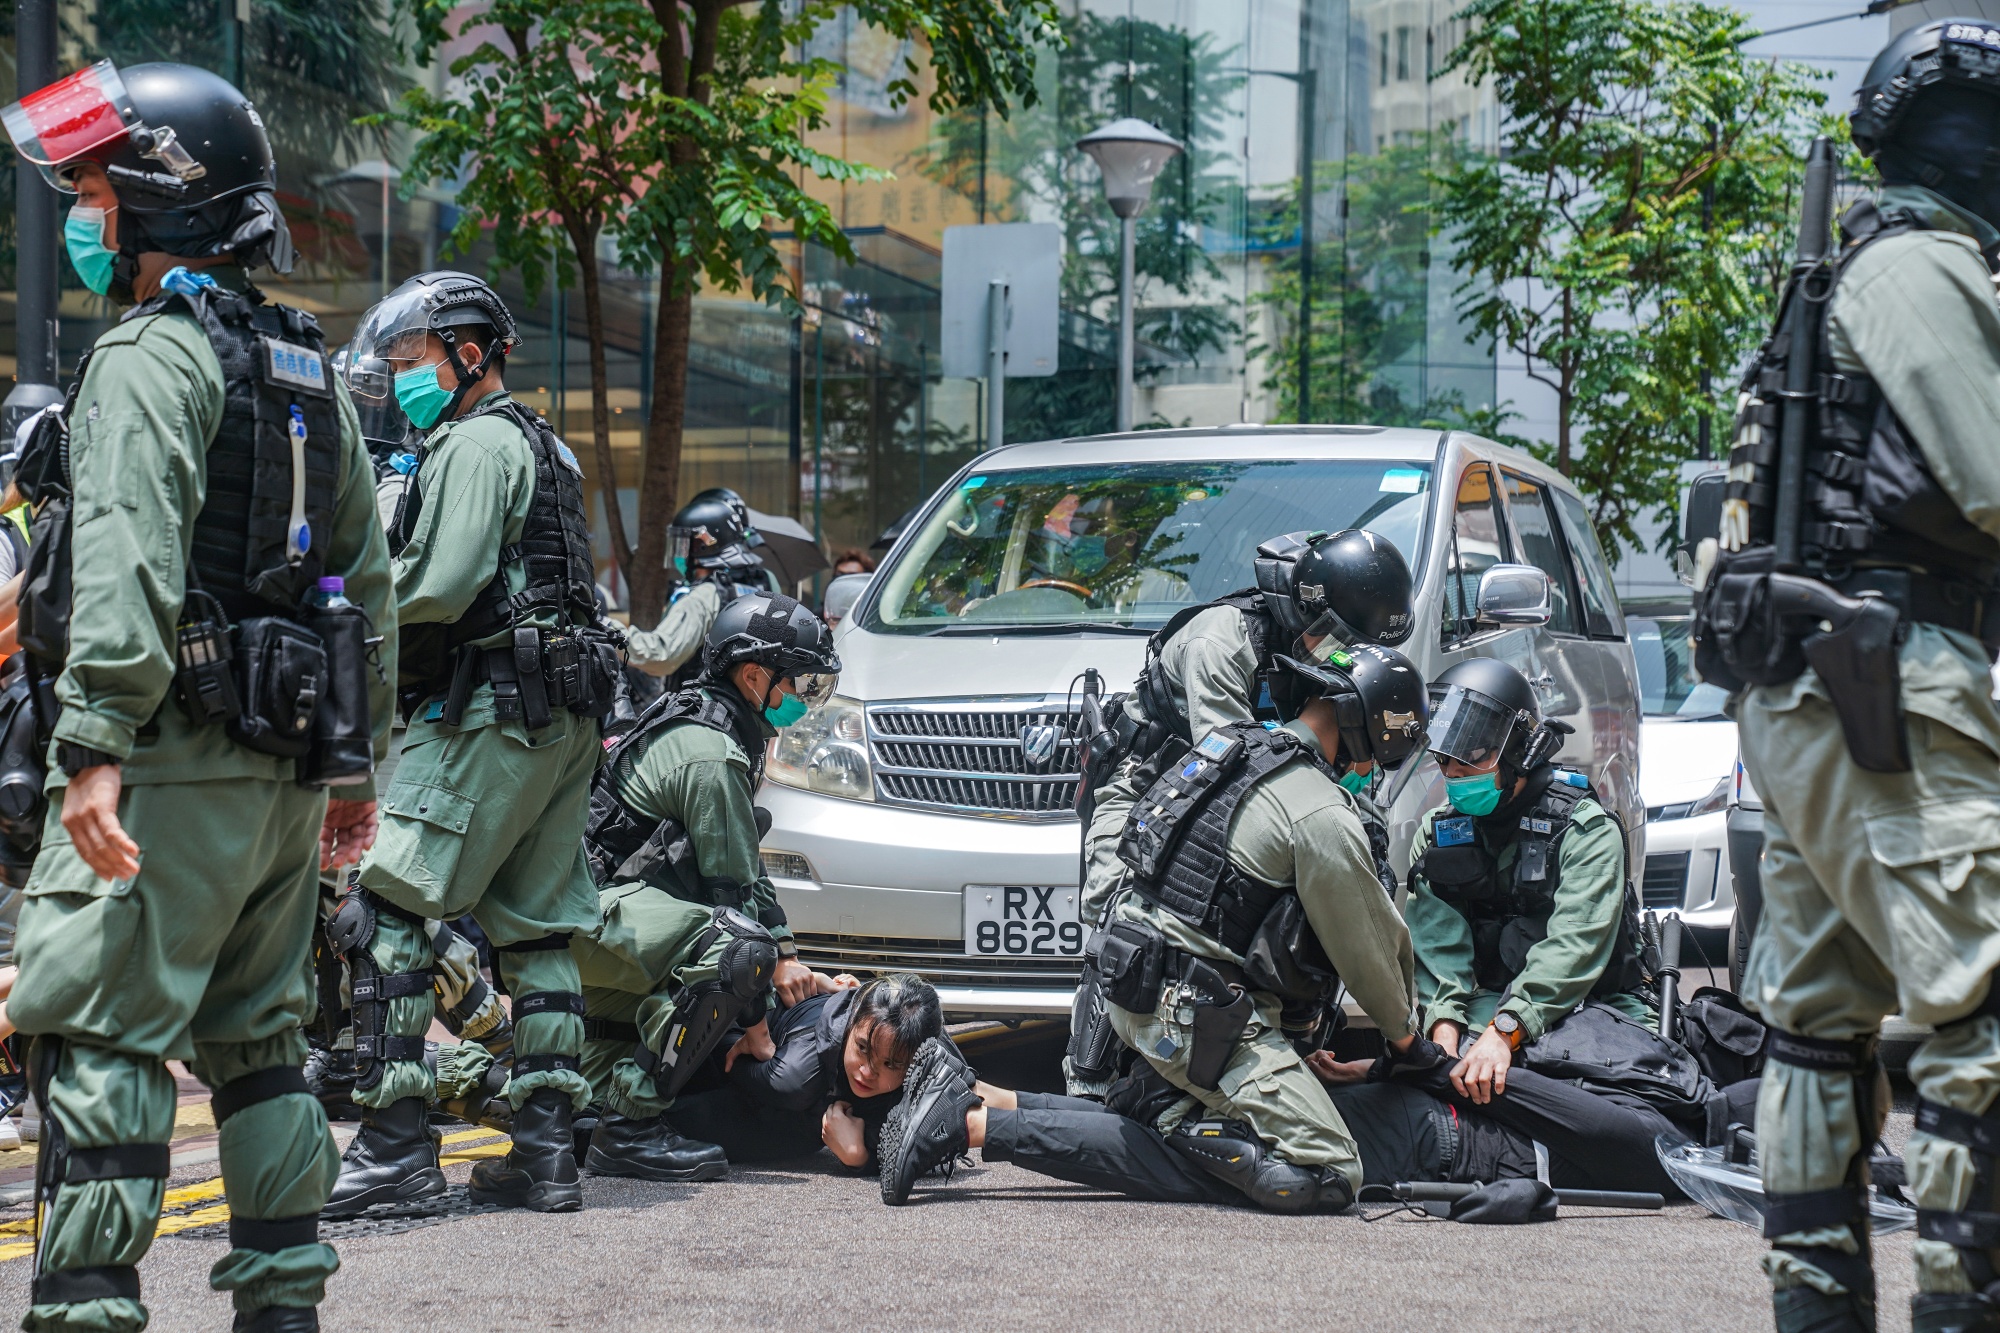 Riot police arrest demonstrators during a protest on May 27.